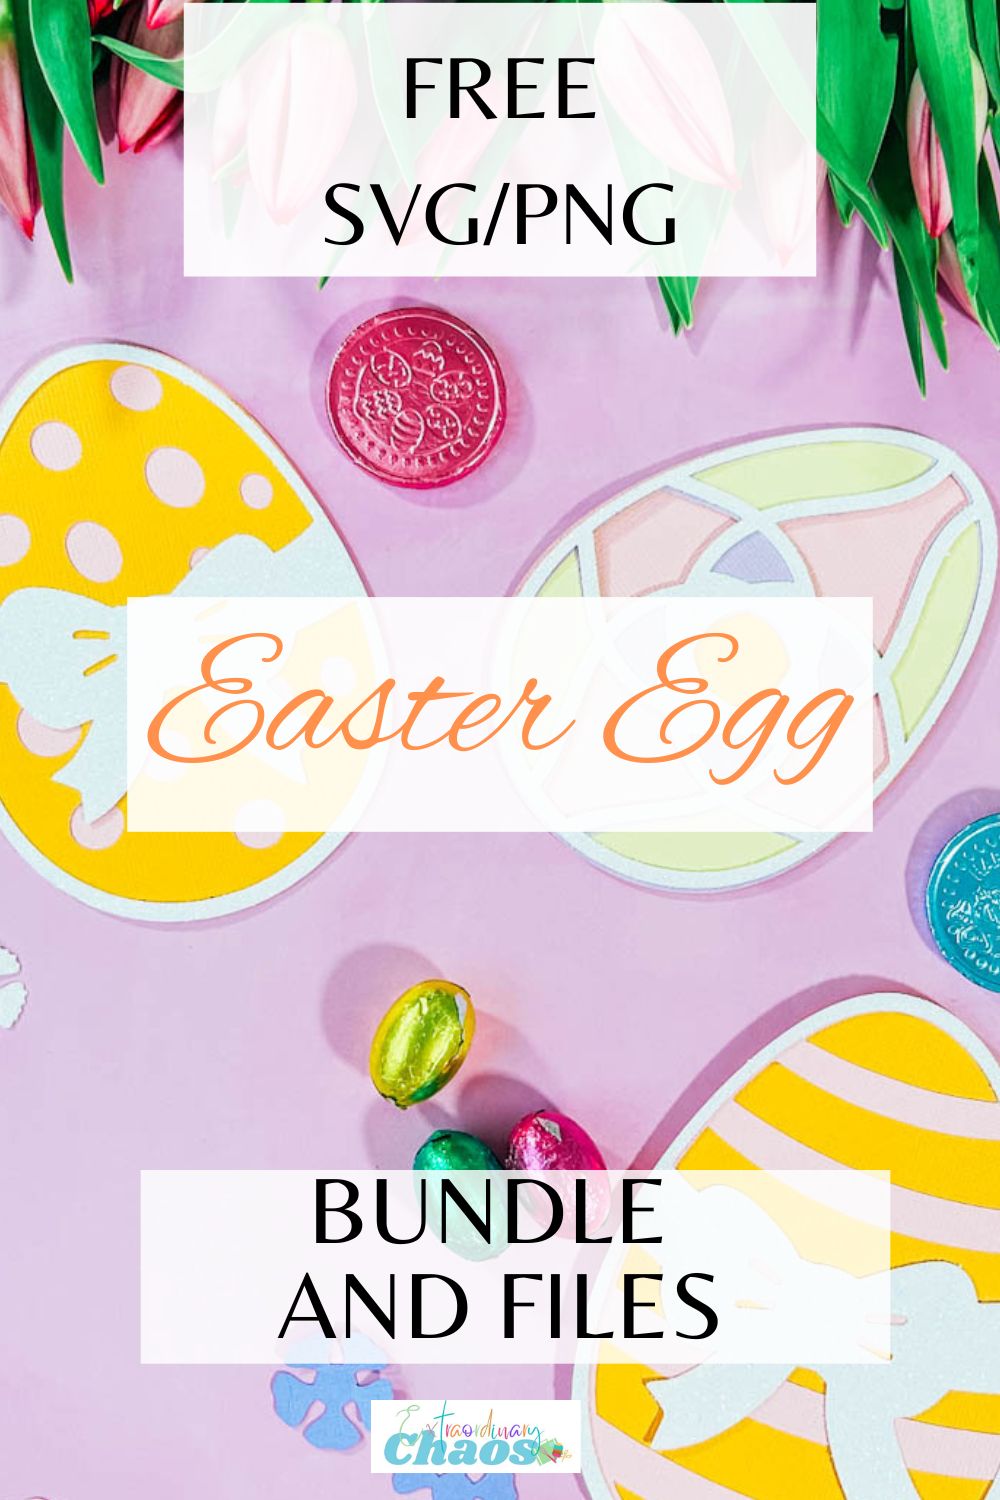 Free Easter Egg Layered file and Easter Egg Bundle for Cricut and Glowforge